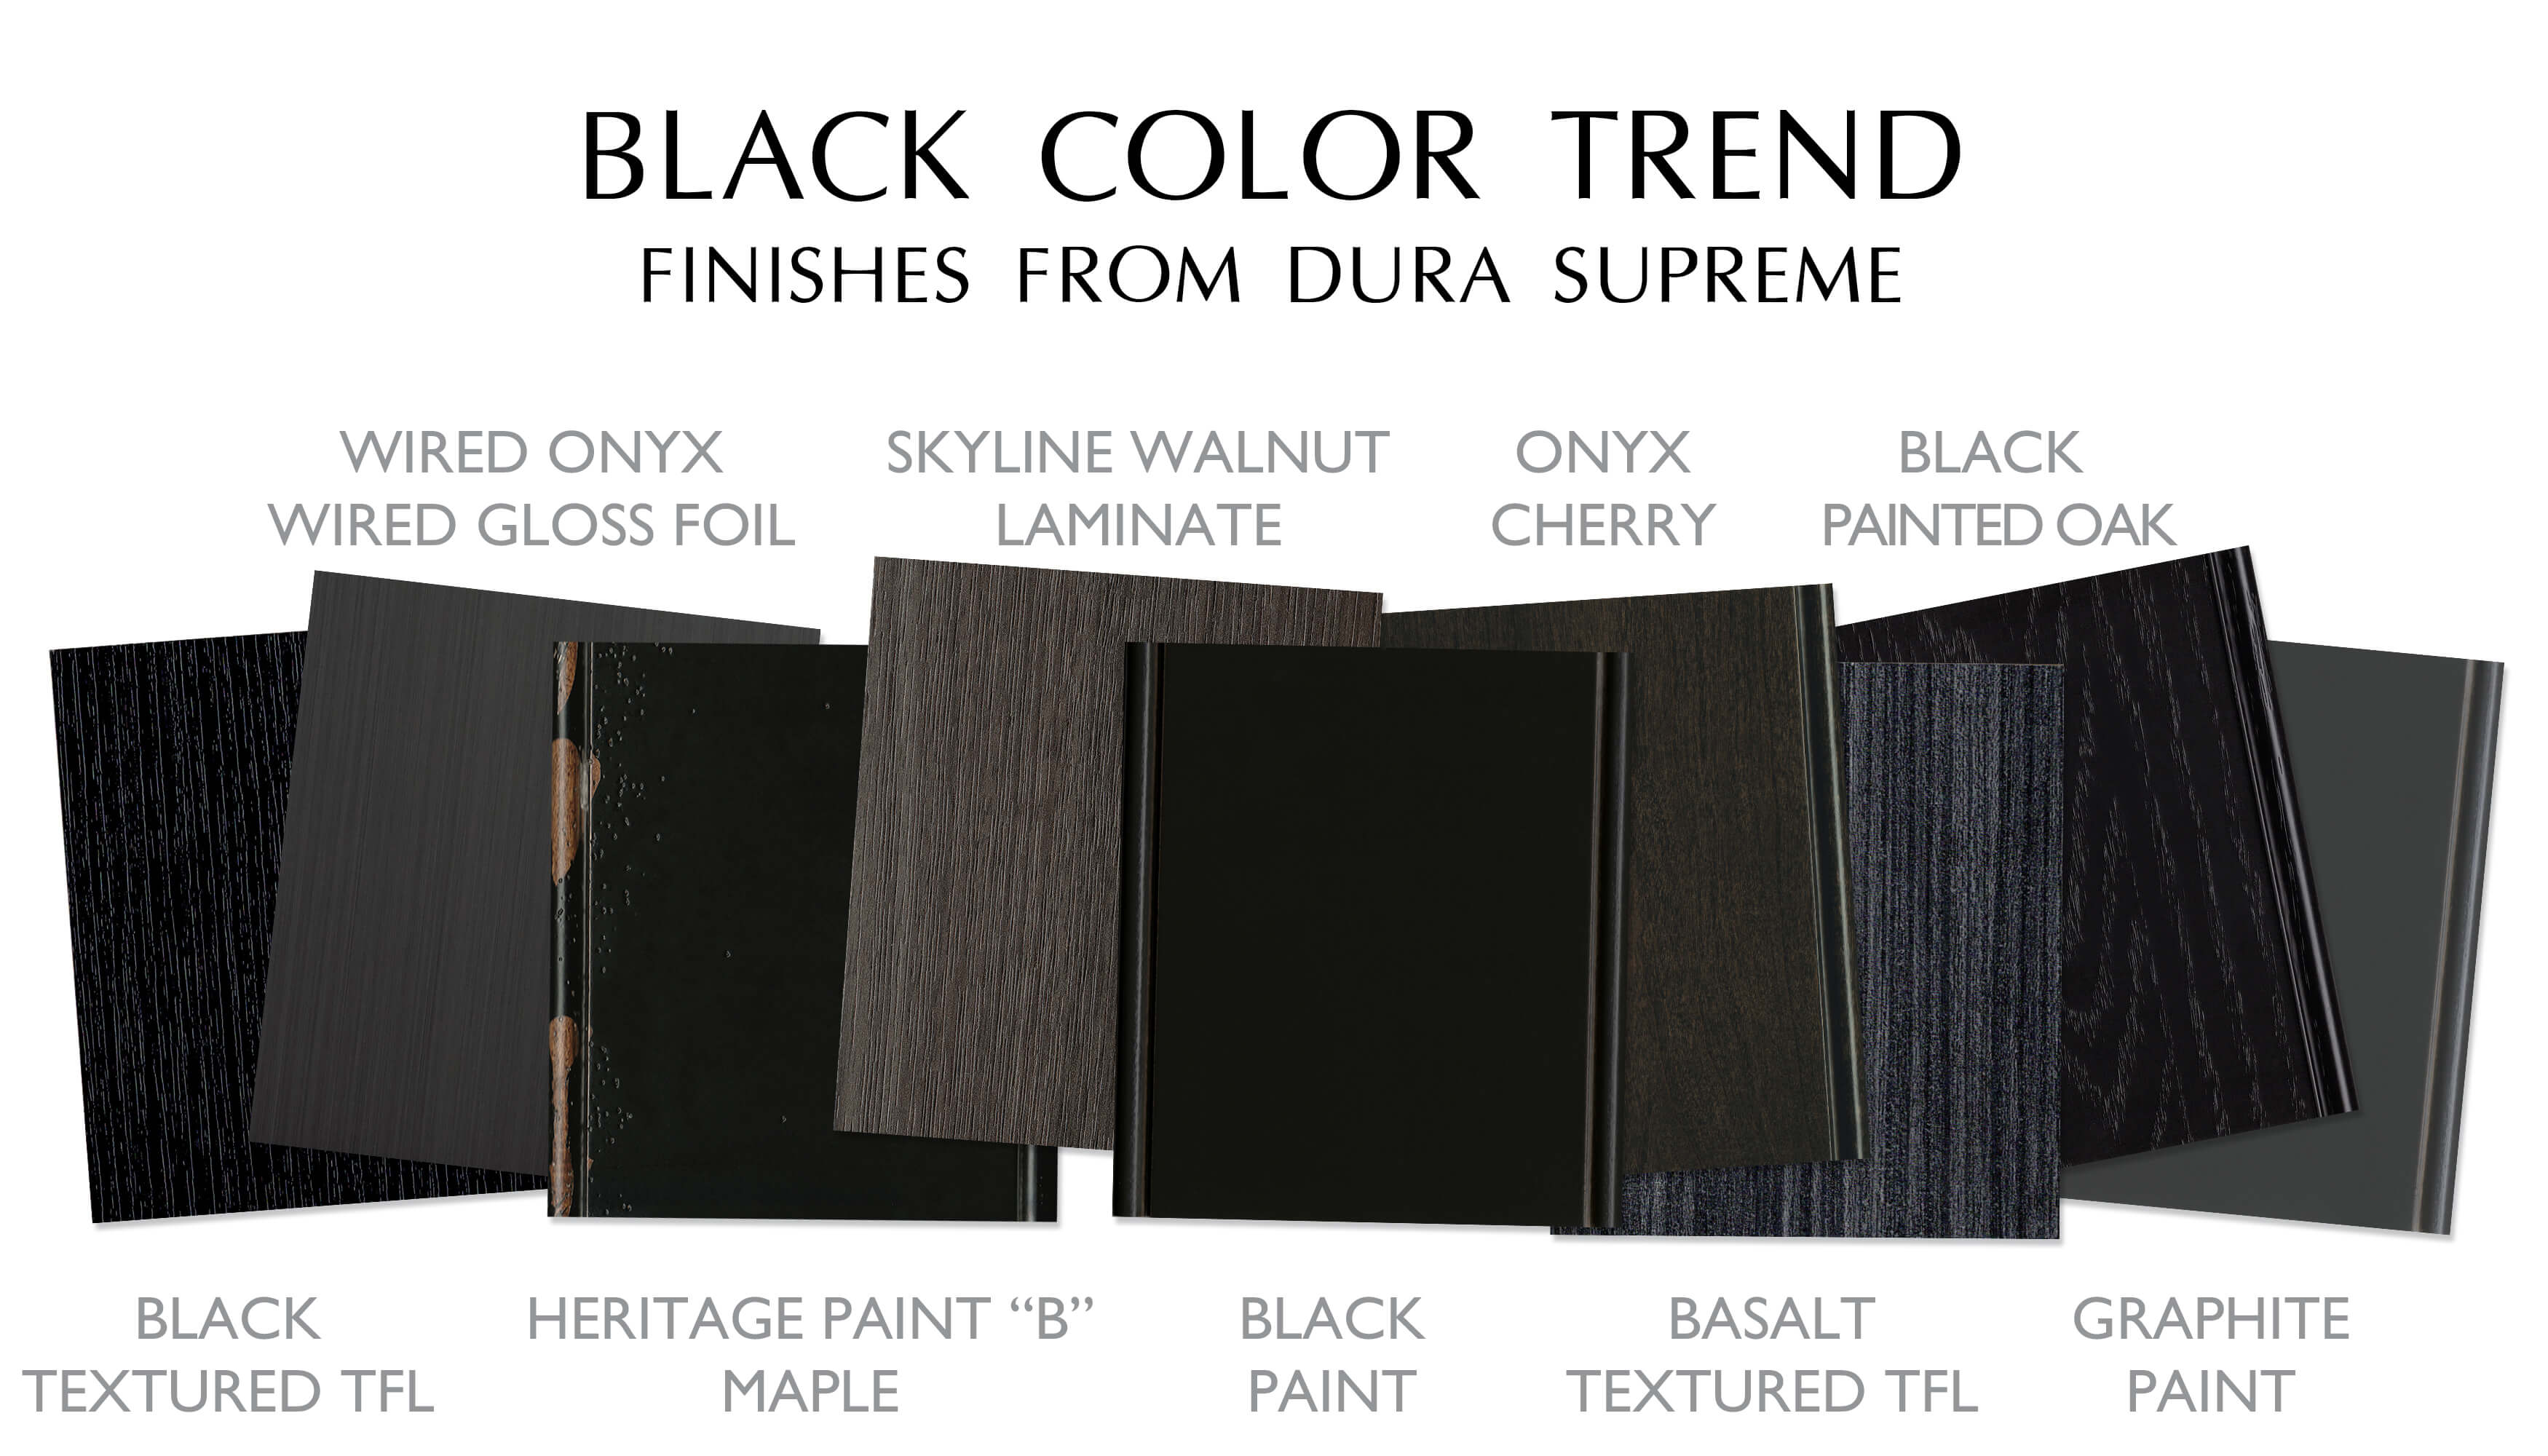 Black Color Trend Cabinet Finishes from Dura Supreme Cabinetry. Black Textured TFL, Wired Onyx Wired Gloss Foil, Heritage Paint B, Skyline Walnut Laminate, Black Paint, Onyx Stain on Cherry, Basalt Textured TFL, Black Painted Oak, and Graphite Paint.